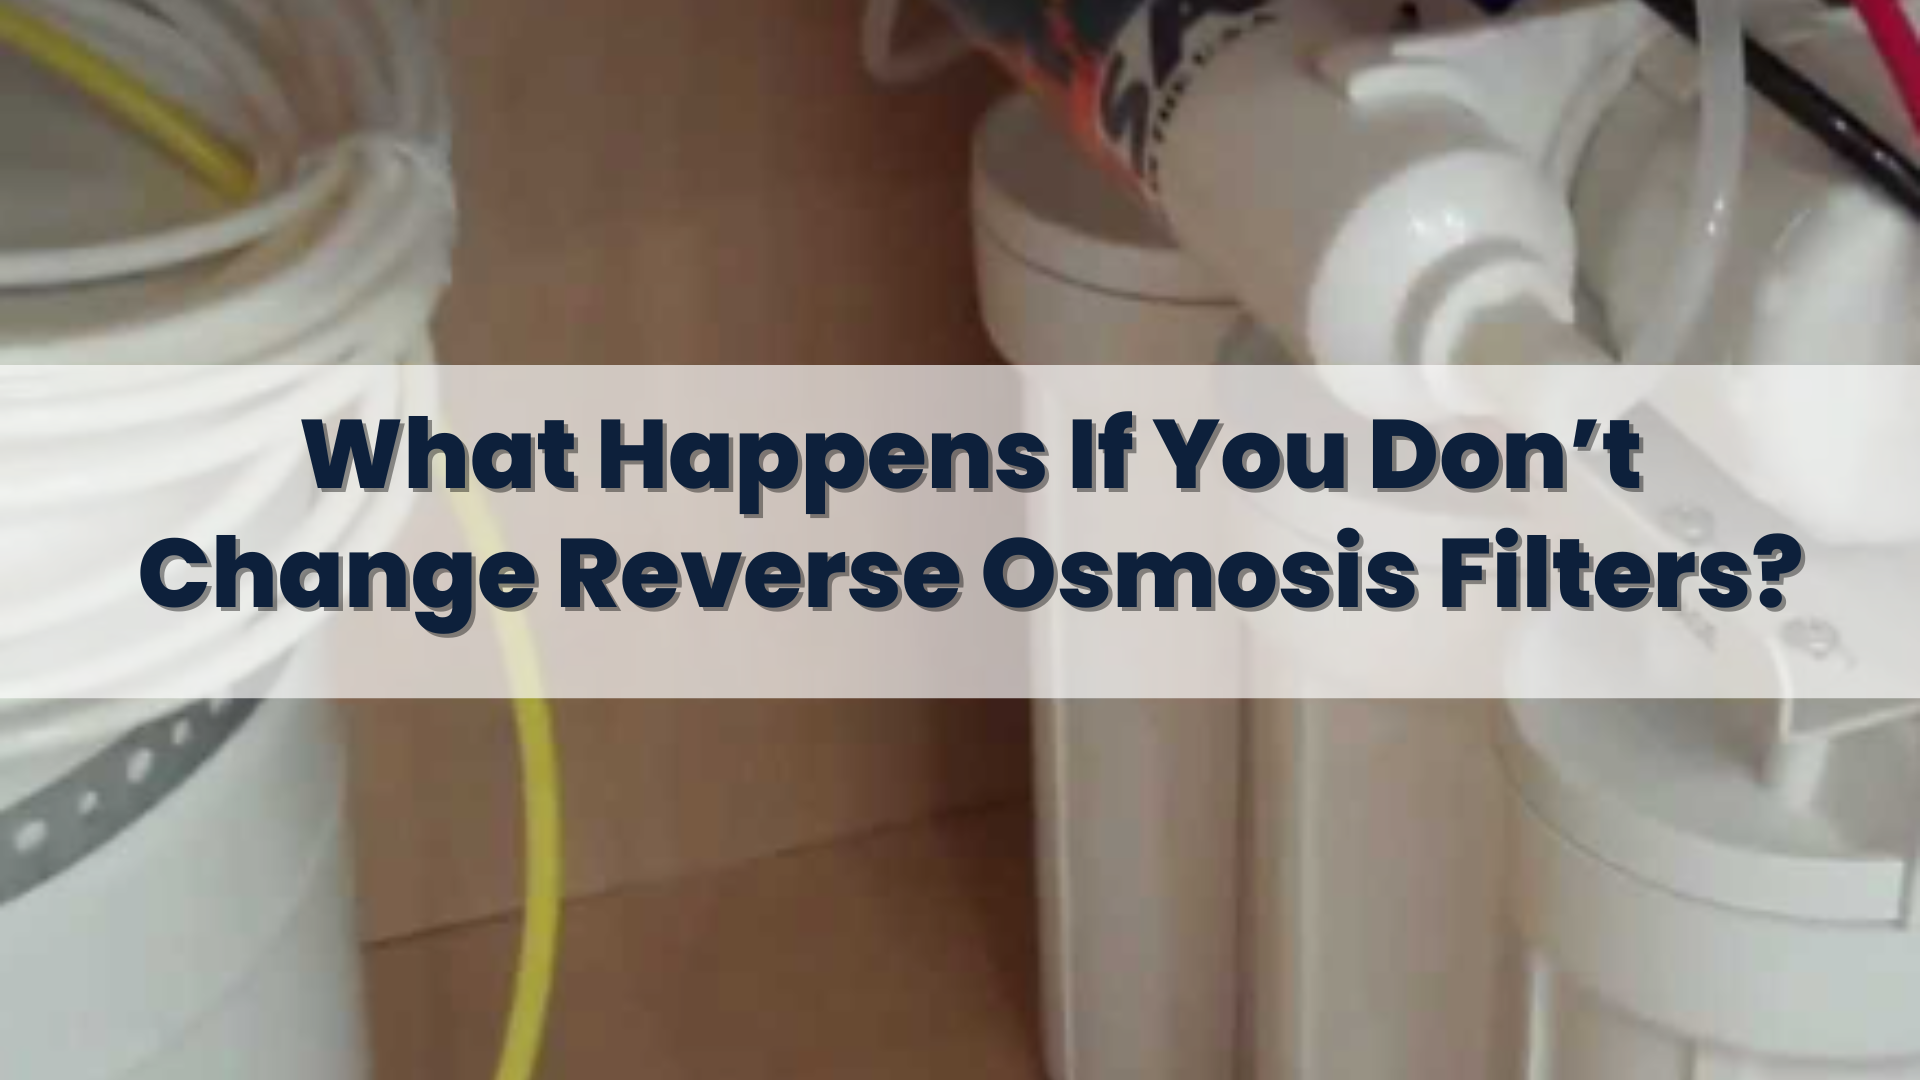 What Happens If You Don’t Change Reverse Osmosis Filters